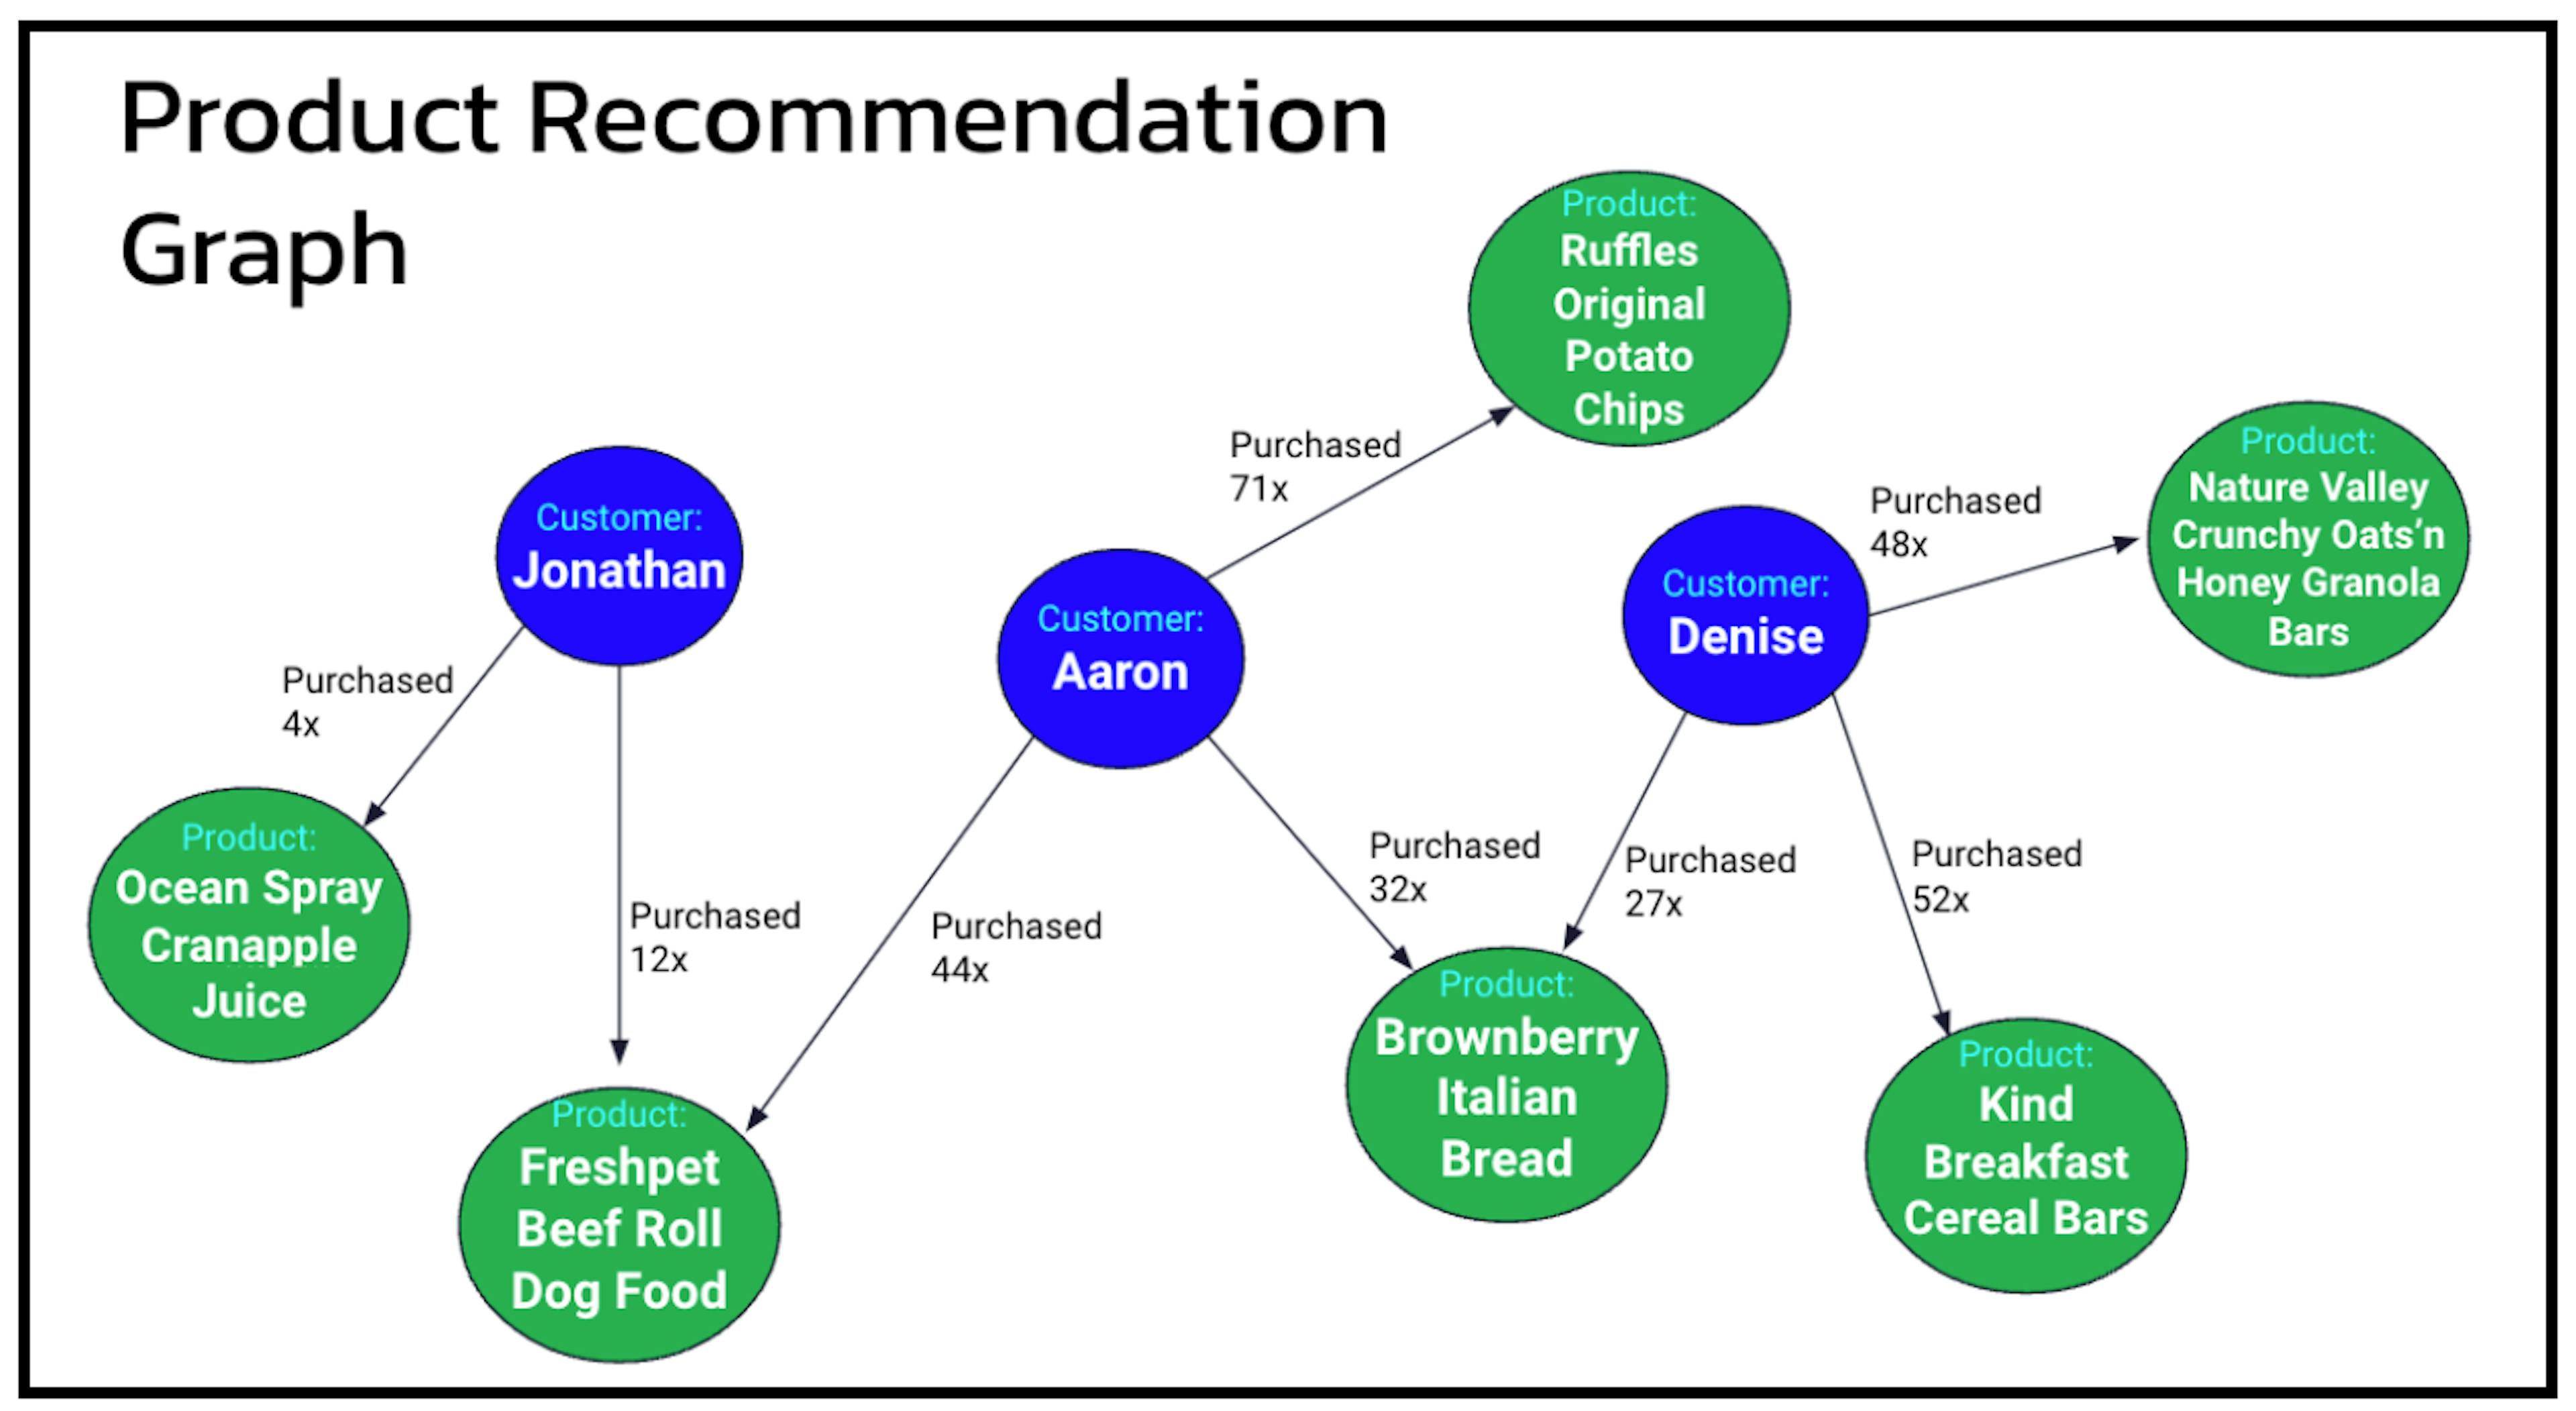 Figure 1 - A product recommendation graph showing the relationship between customers and their purchased products.